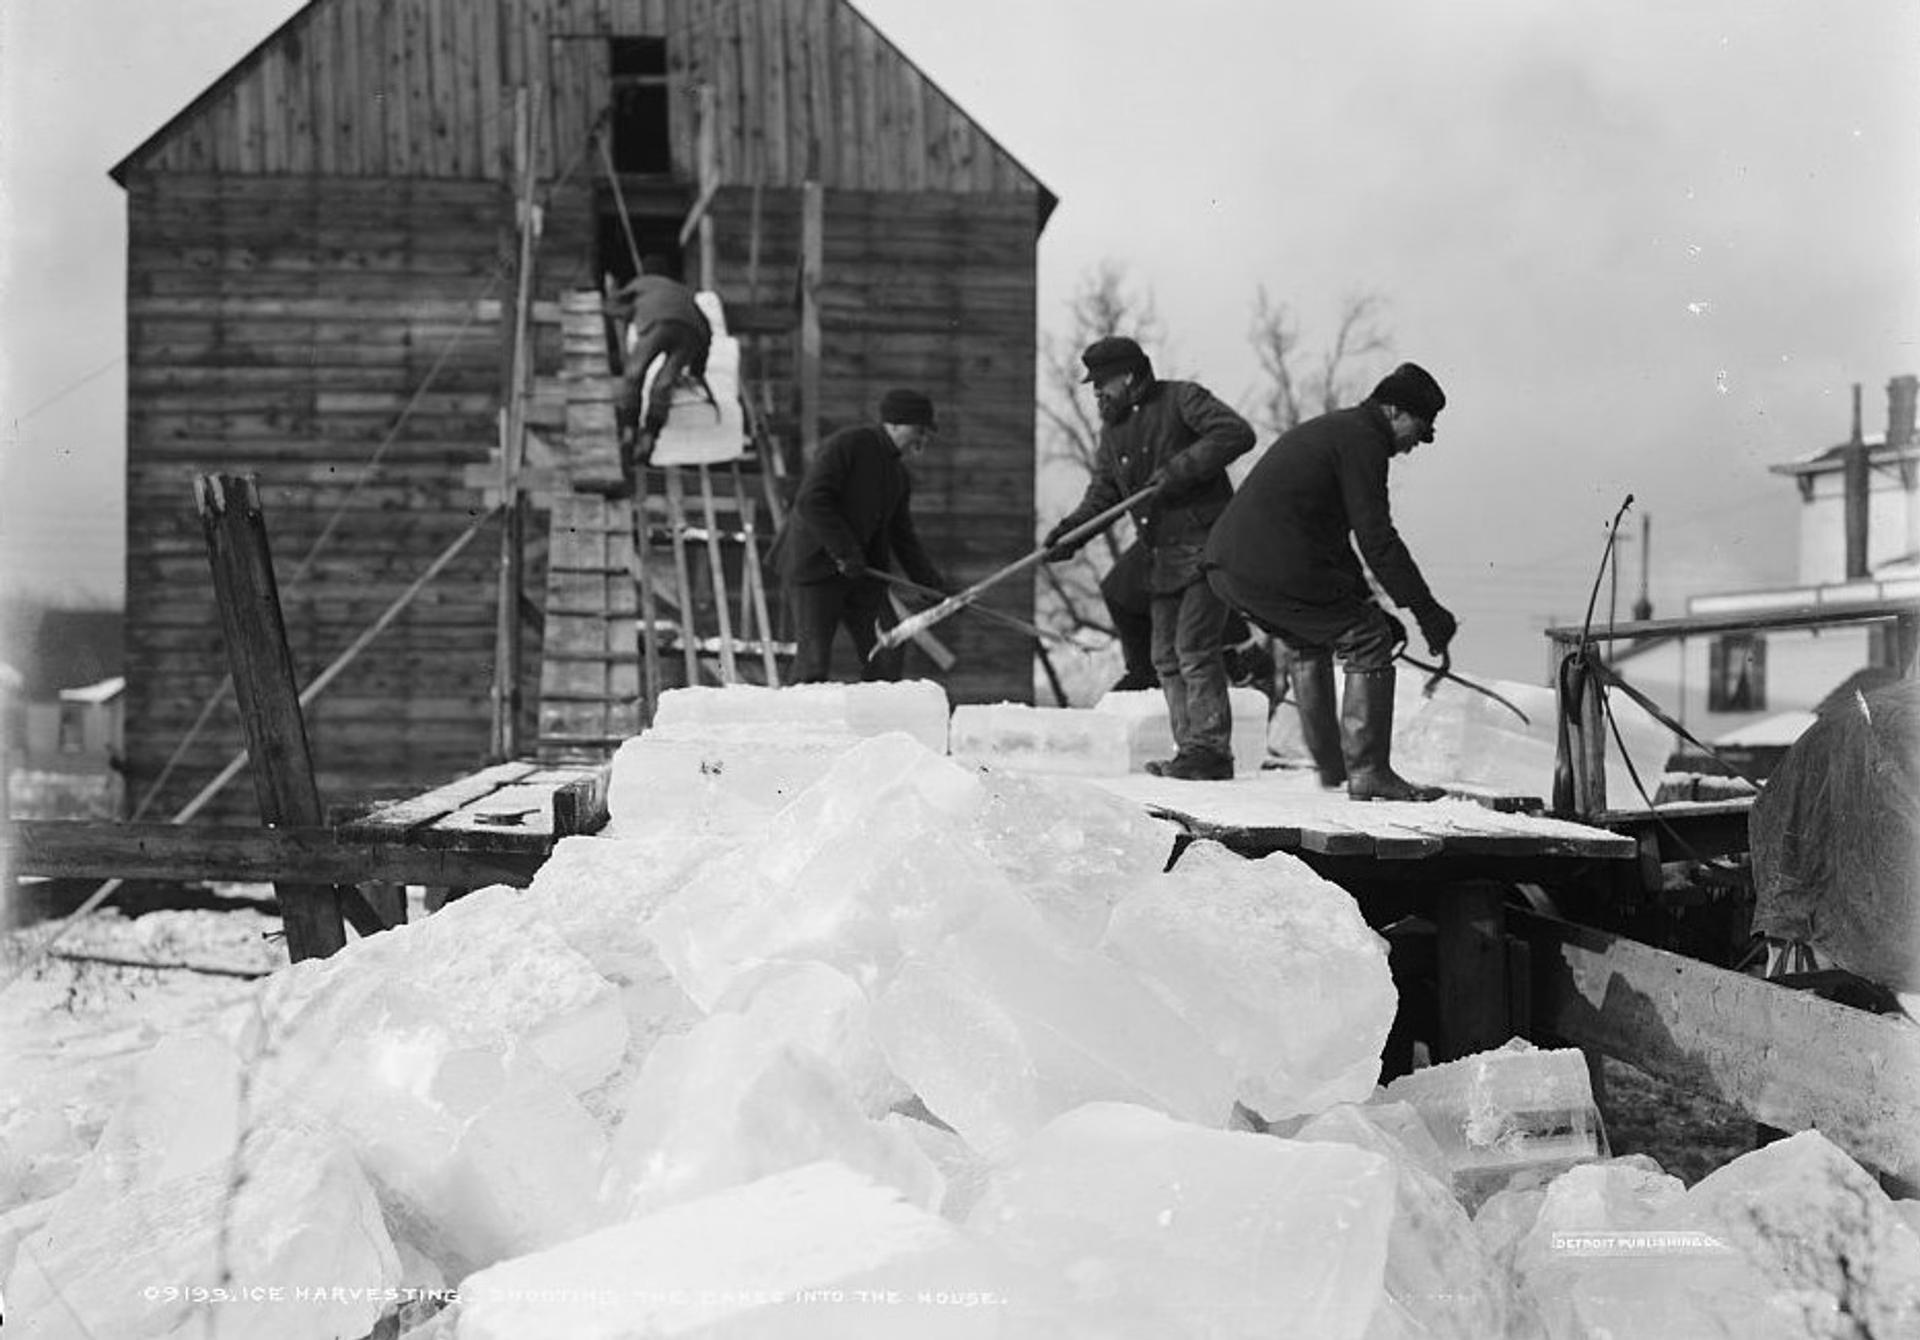 Men store ice in an ice house in a circa 1903 photo from the Library of Congress collection.